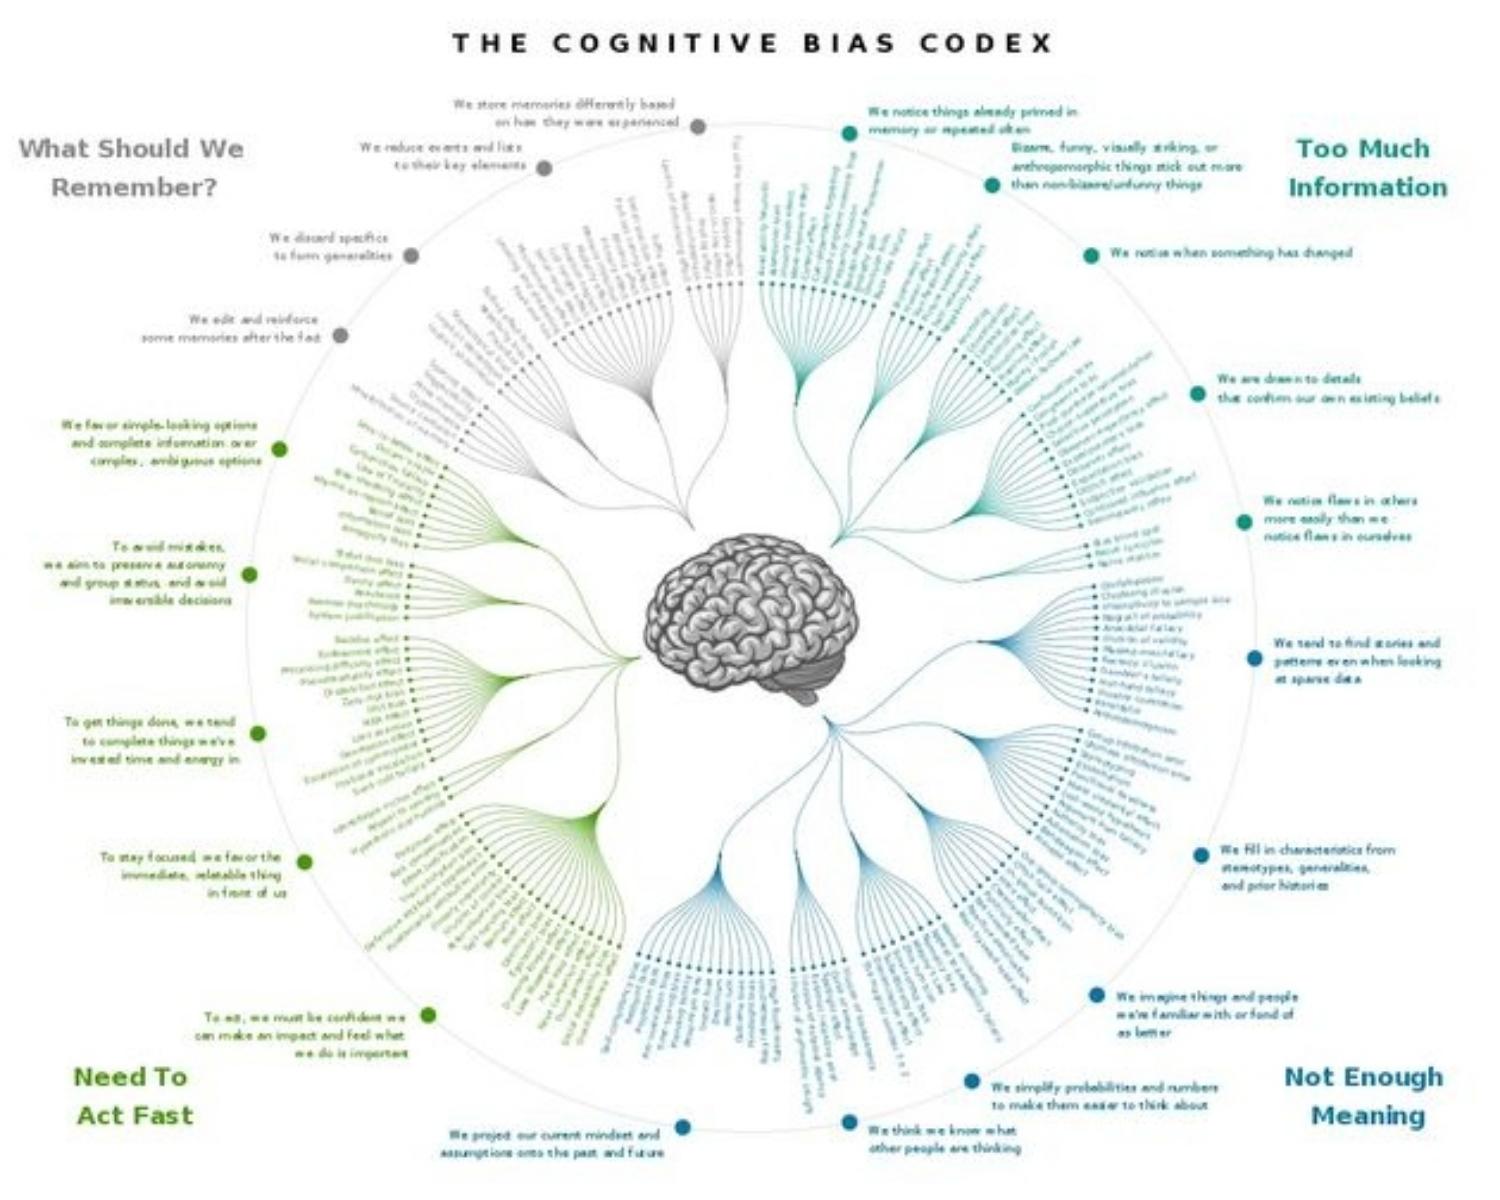 What Are Cognitive Biases?